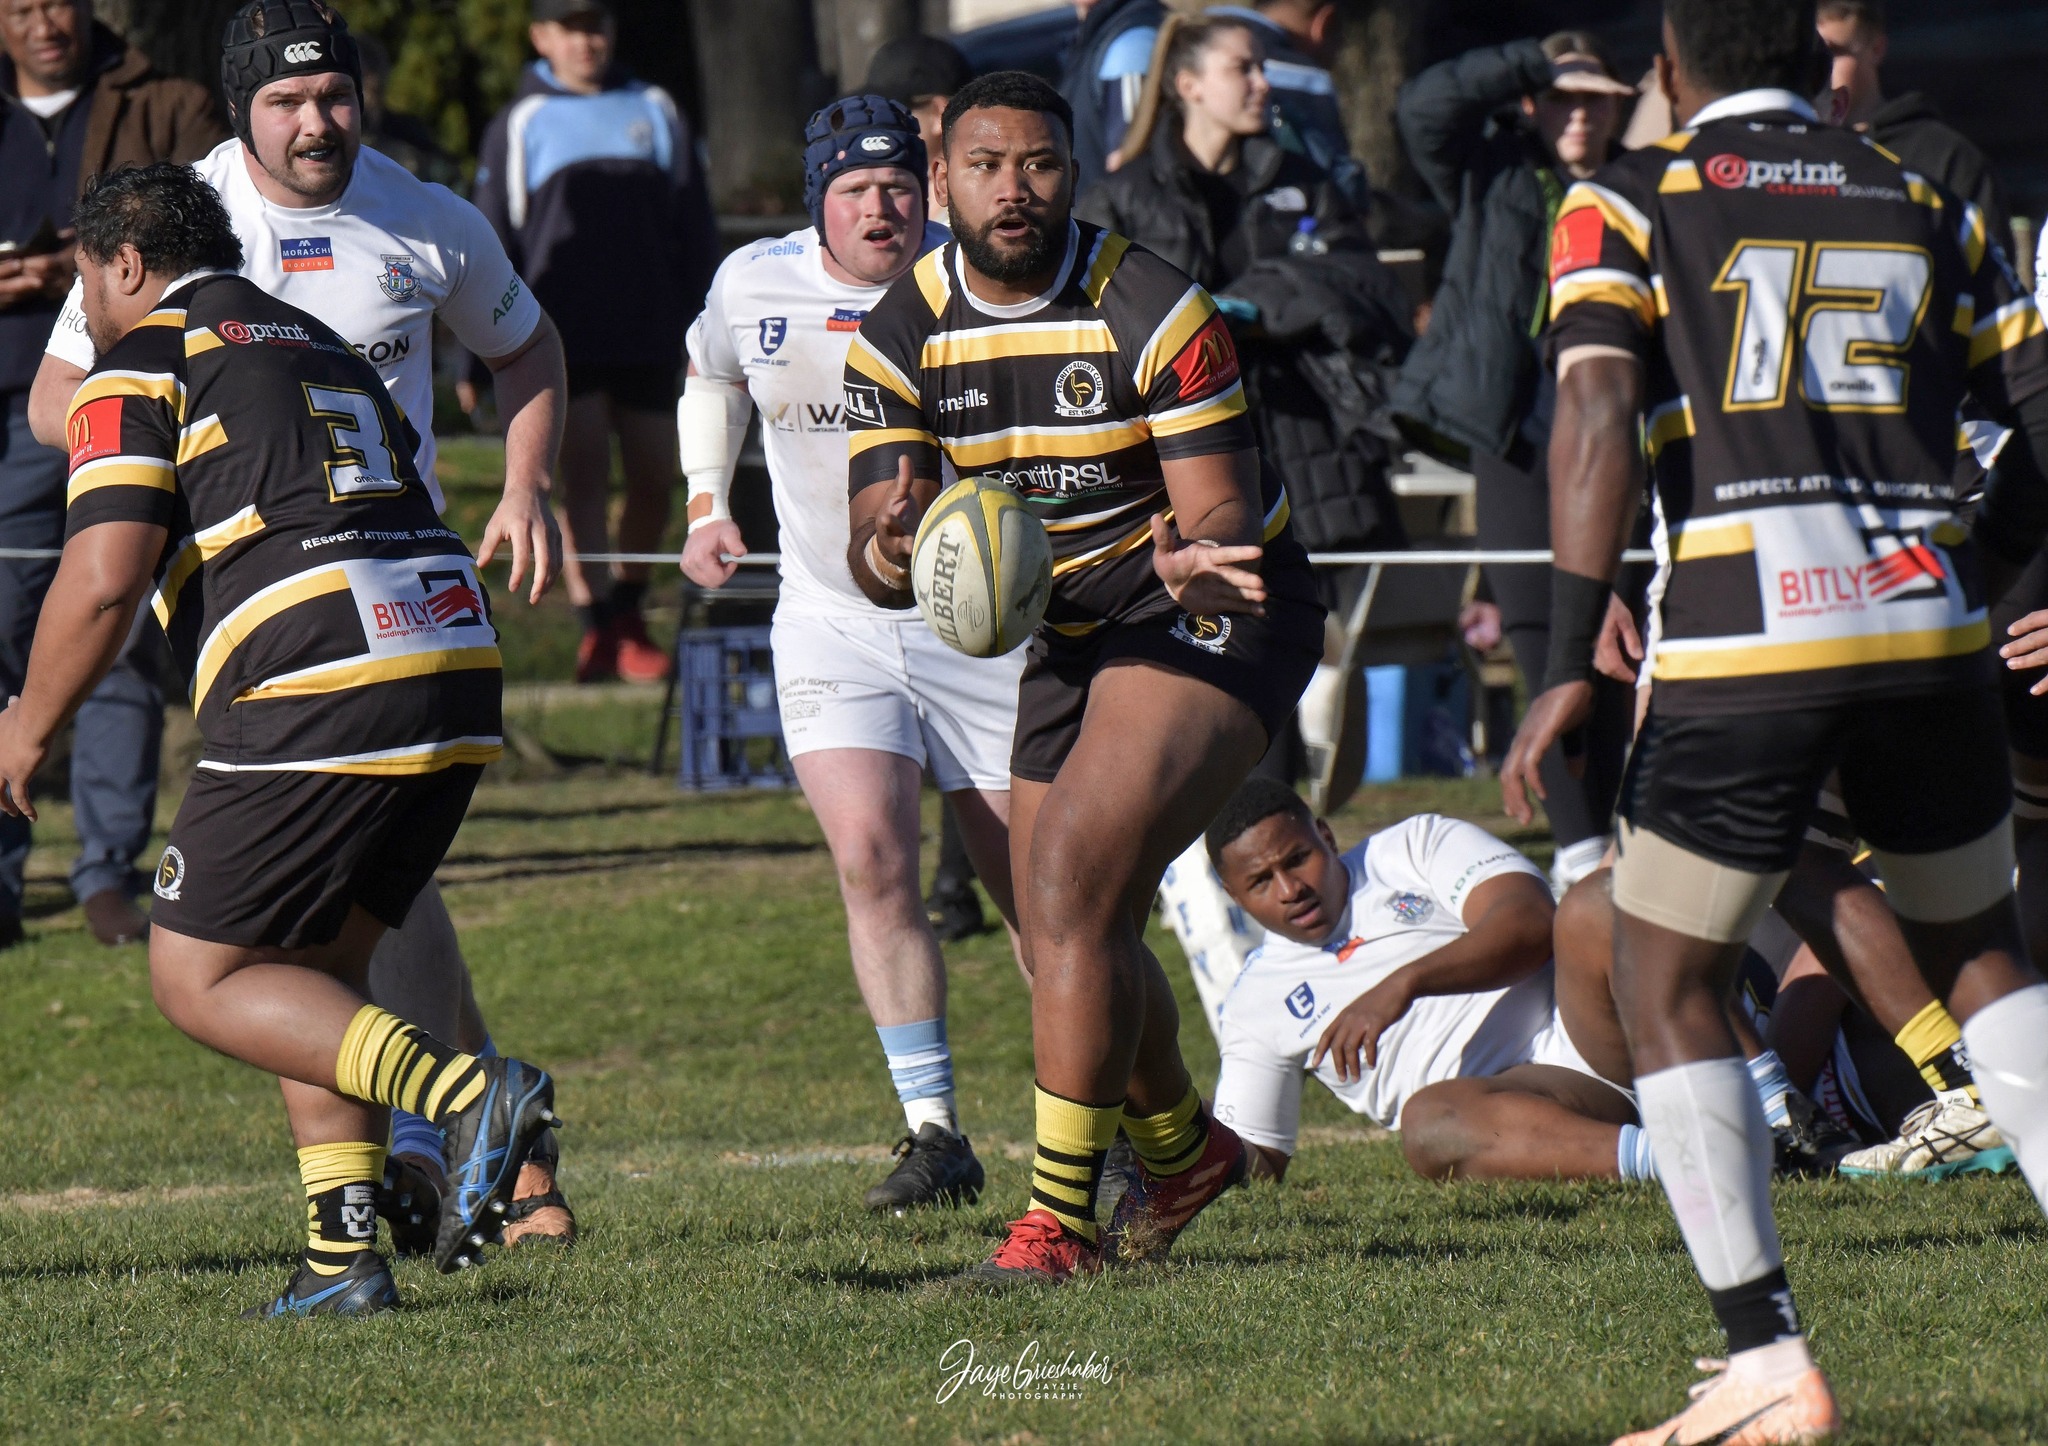 Penrith in action against the Queanbeyan Whites. Source: Jayzie Photography